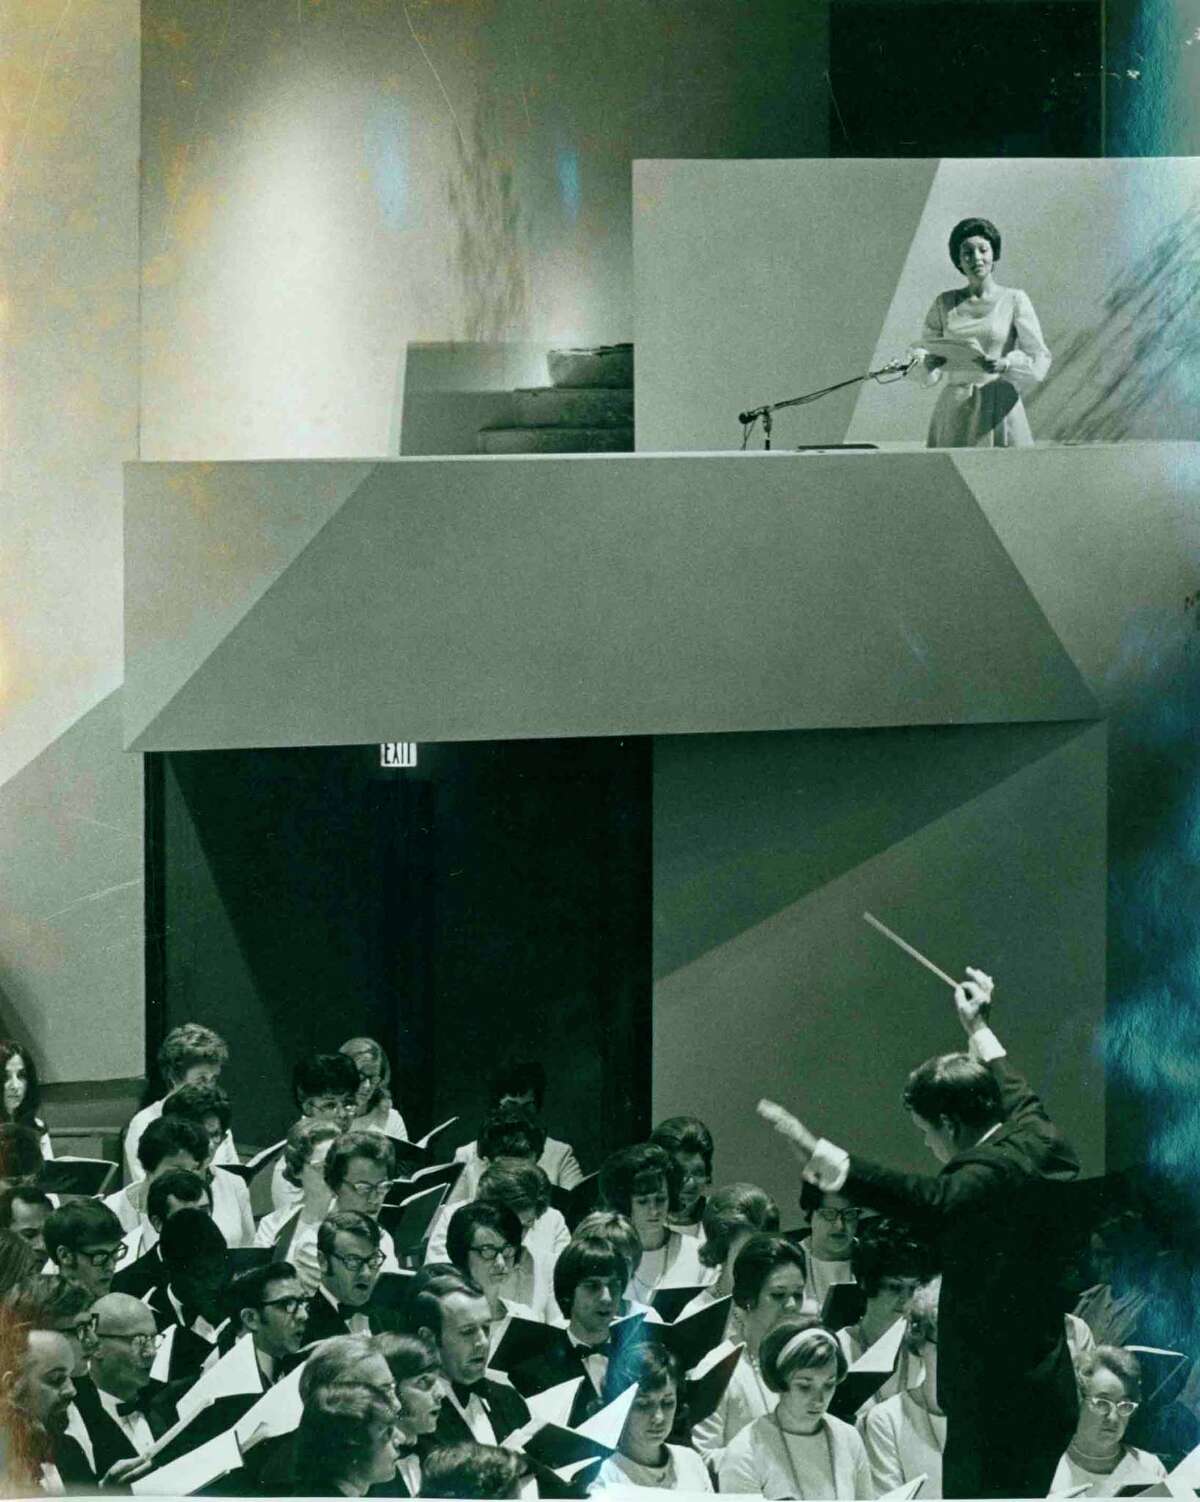 This was part of the live performance in the auditorium at Midland Center for the Arts on May 1, 1971. (Photo Provided)